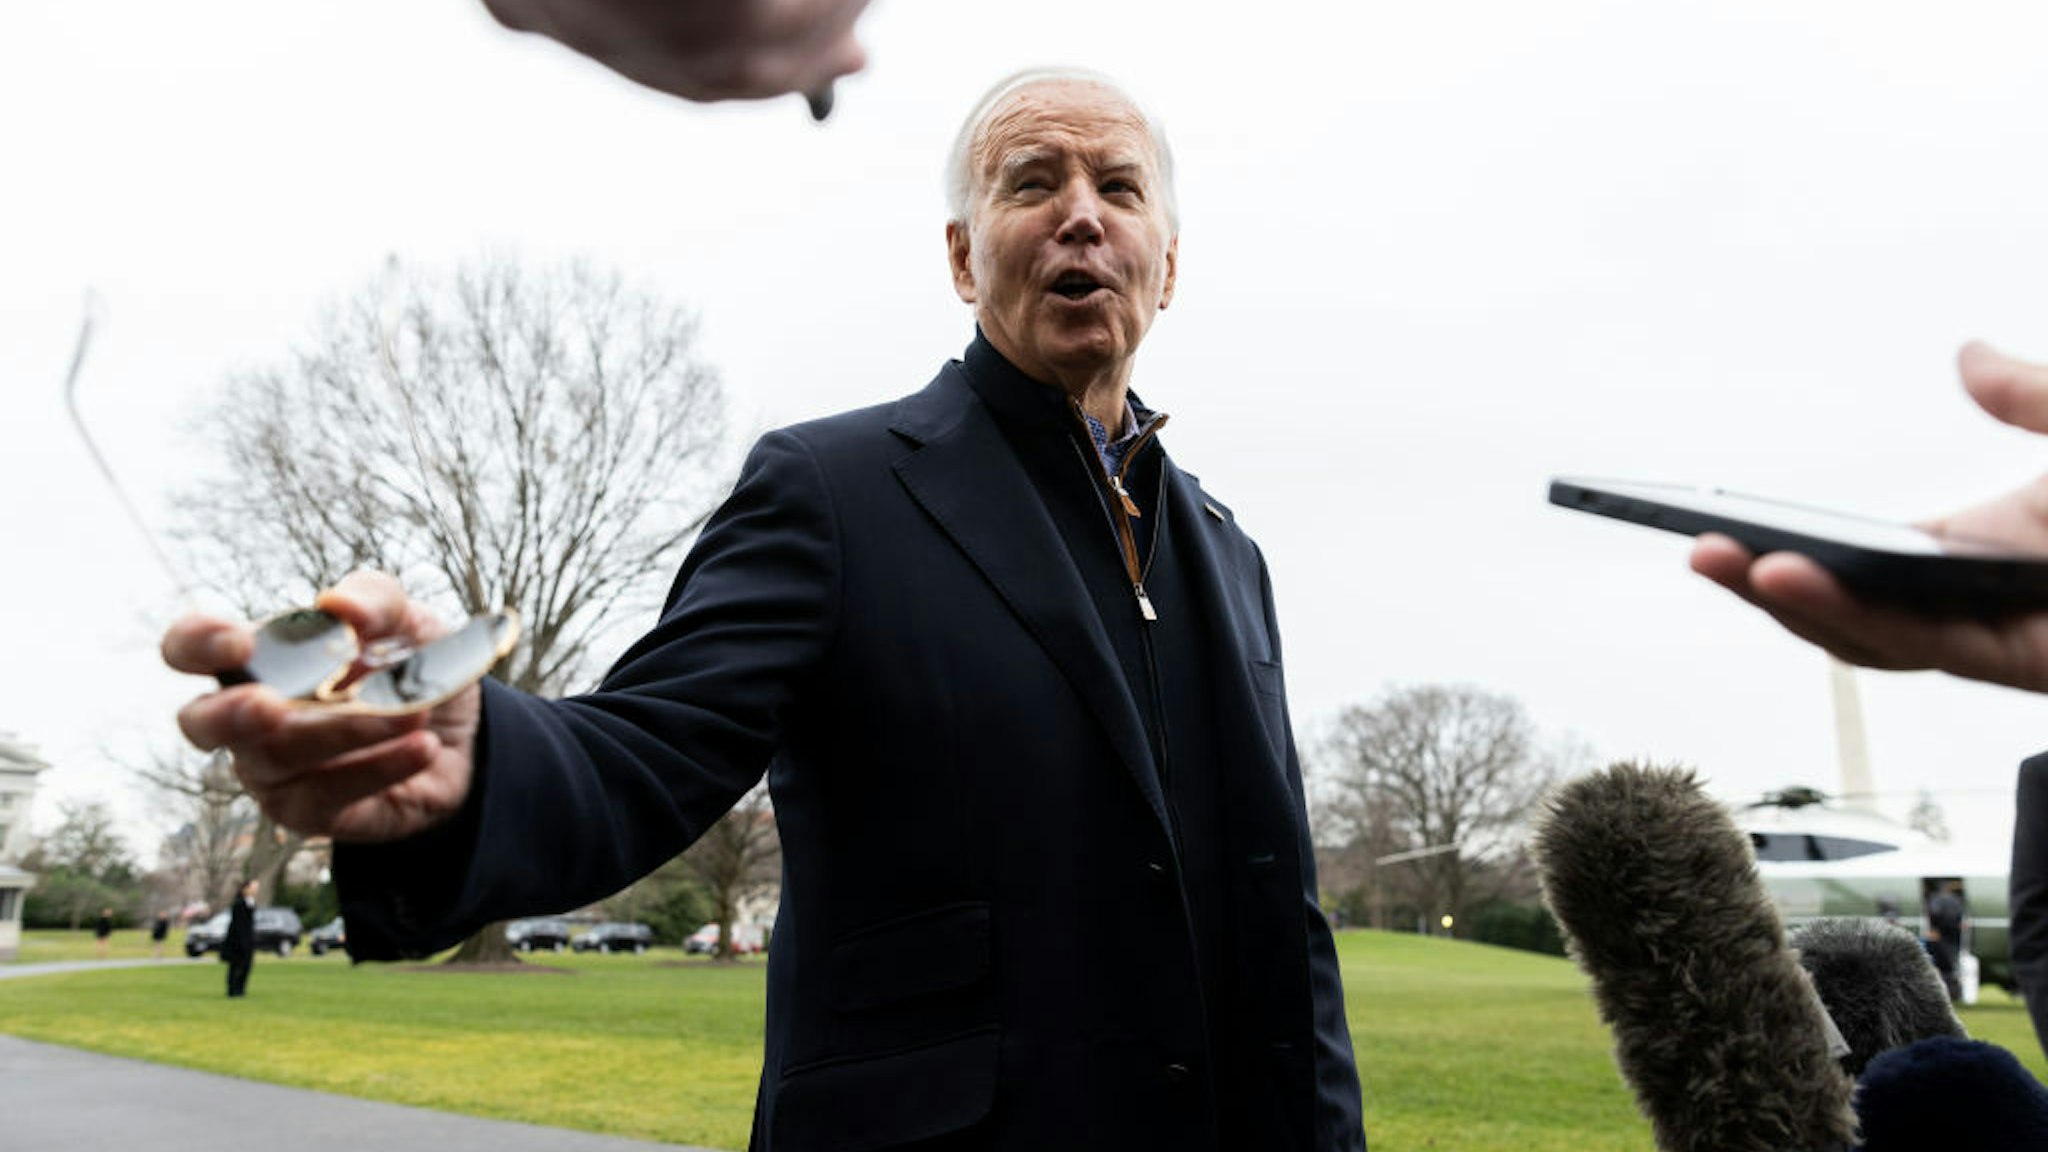 US President Joe Biden speaks to members of the media before boarding Marine One in Washington, DC, US, on Saturday, Dec. 23, 2023. While departing for Camp David, Biden said he "can't think of one" reason presidents should receive absolute immunity from prosecution, as Republican frontrunner Donald Trump has claimed. Photographer: Julia Nikhinson/UPI/Bloomberg via Getty Images